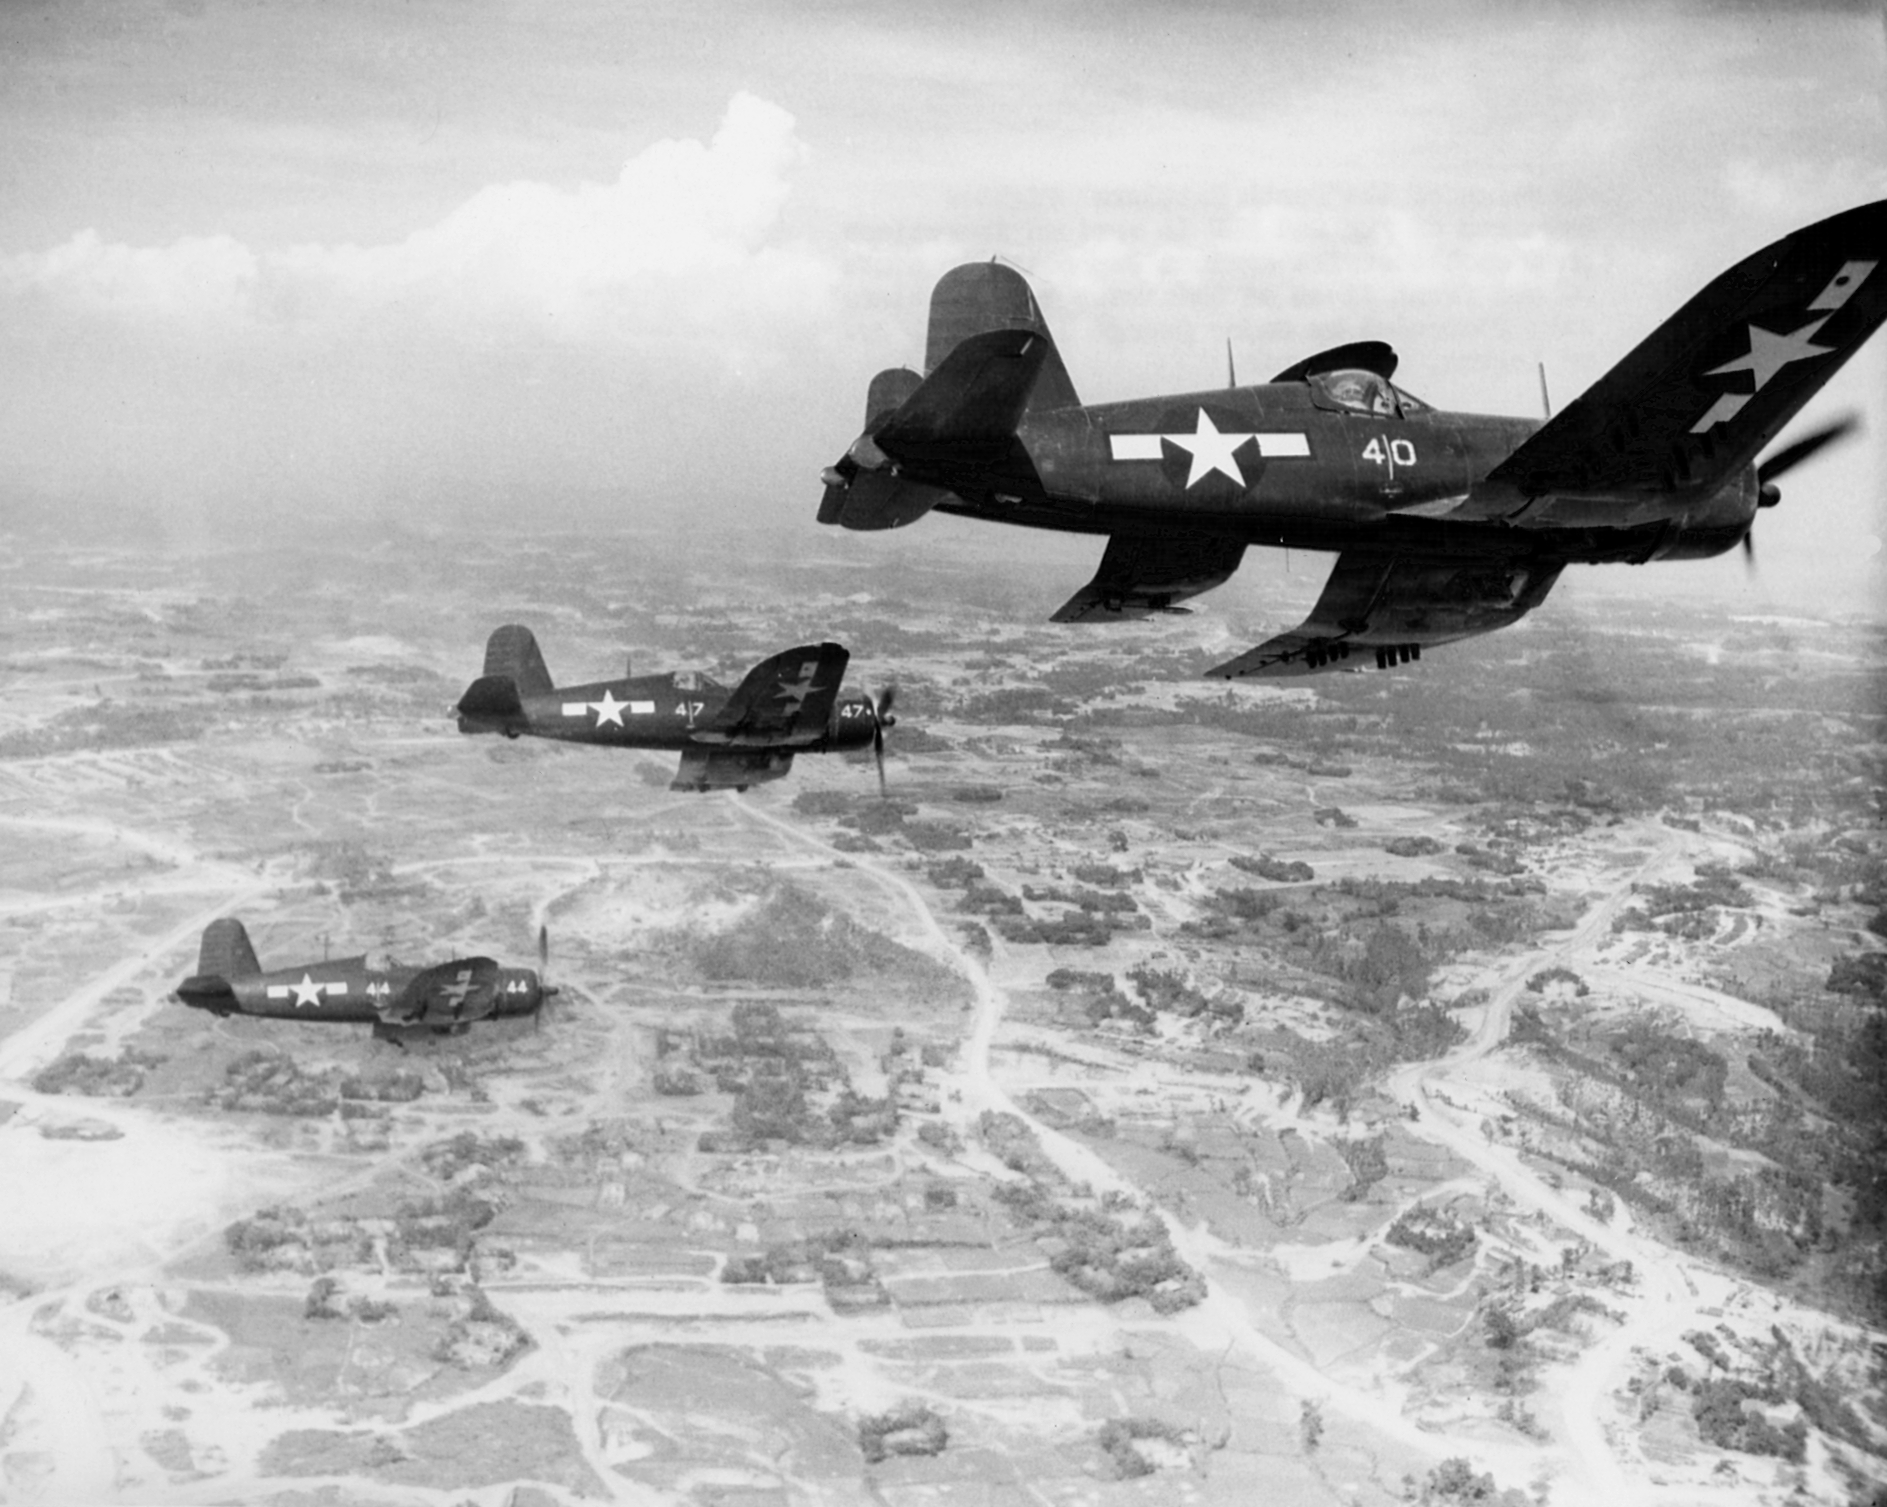 FG-1D Corsair fighters of US Marine Corps squadron VMF-323 in flight over Okinawa, Japan, 10 Jun 1945